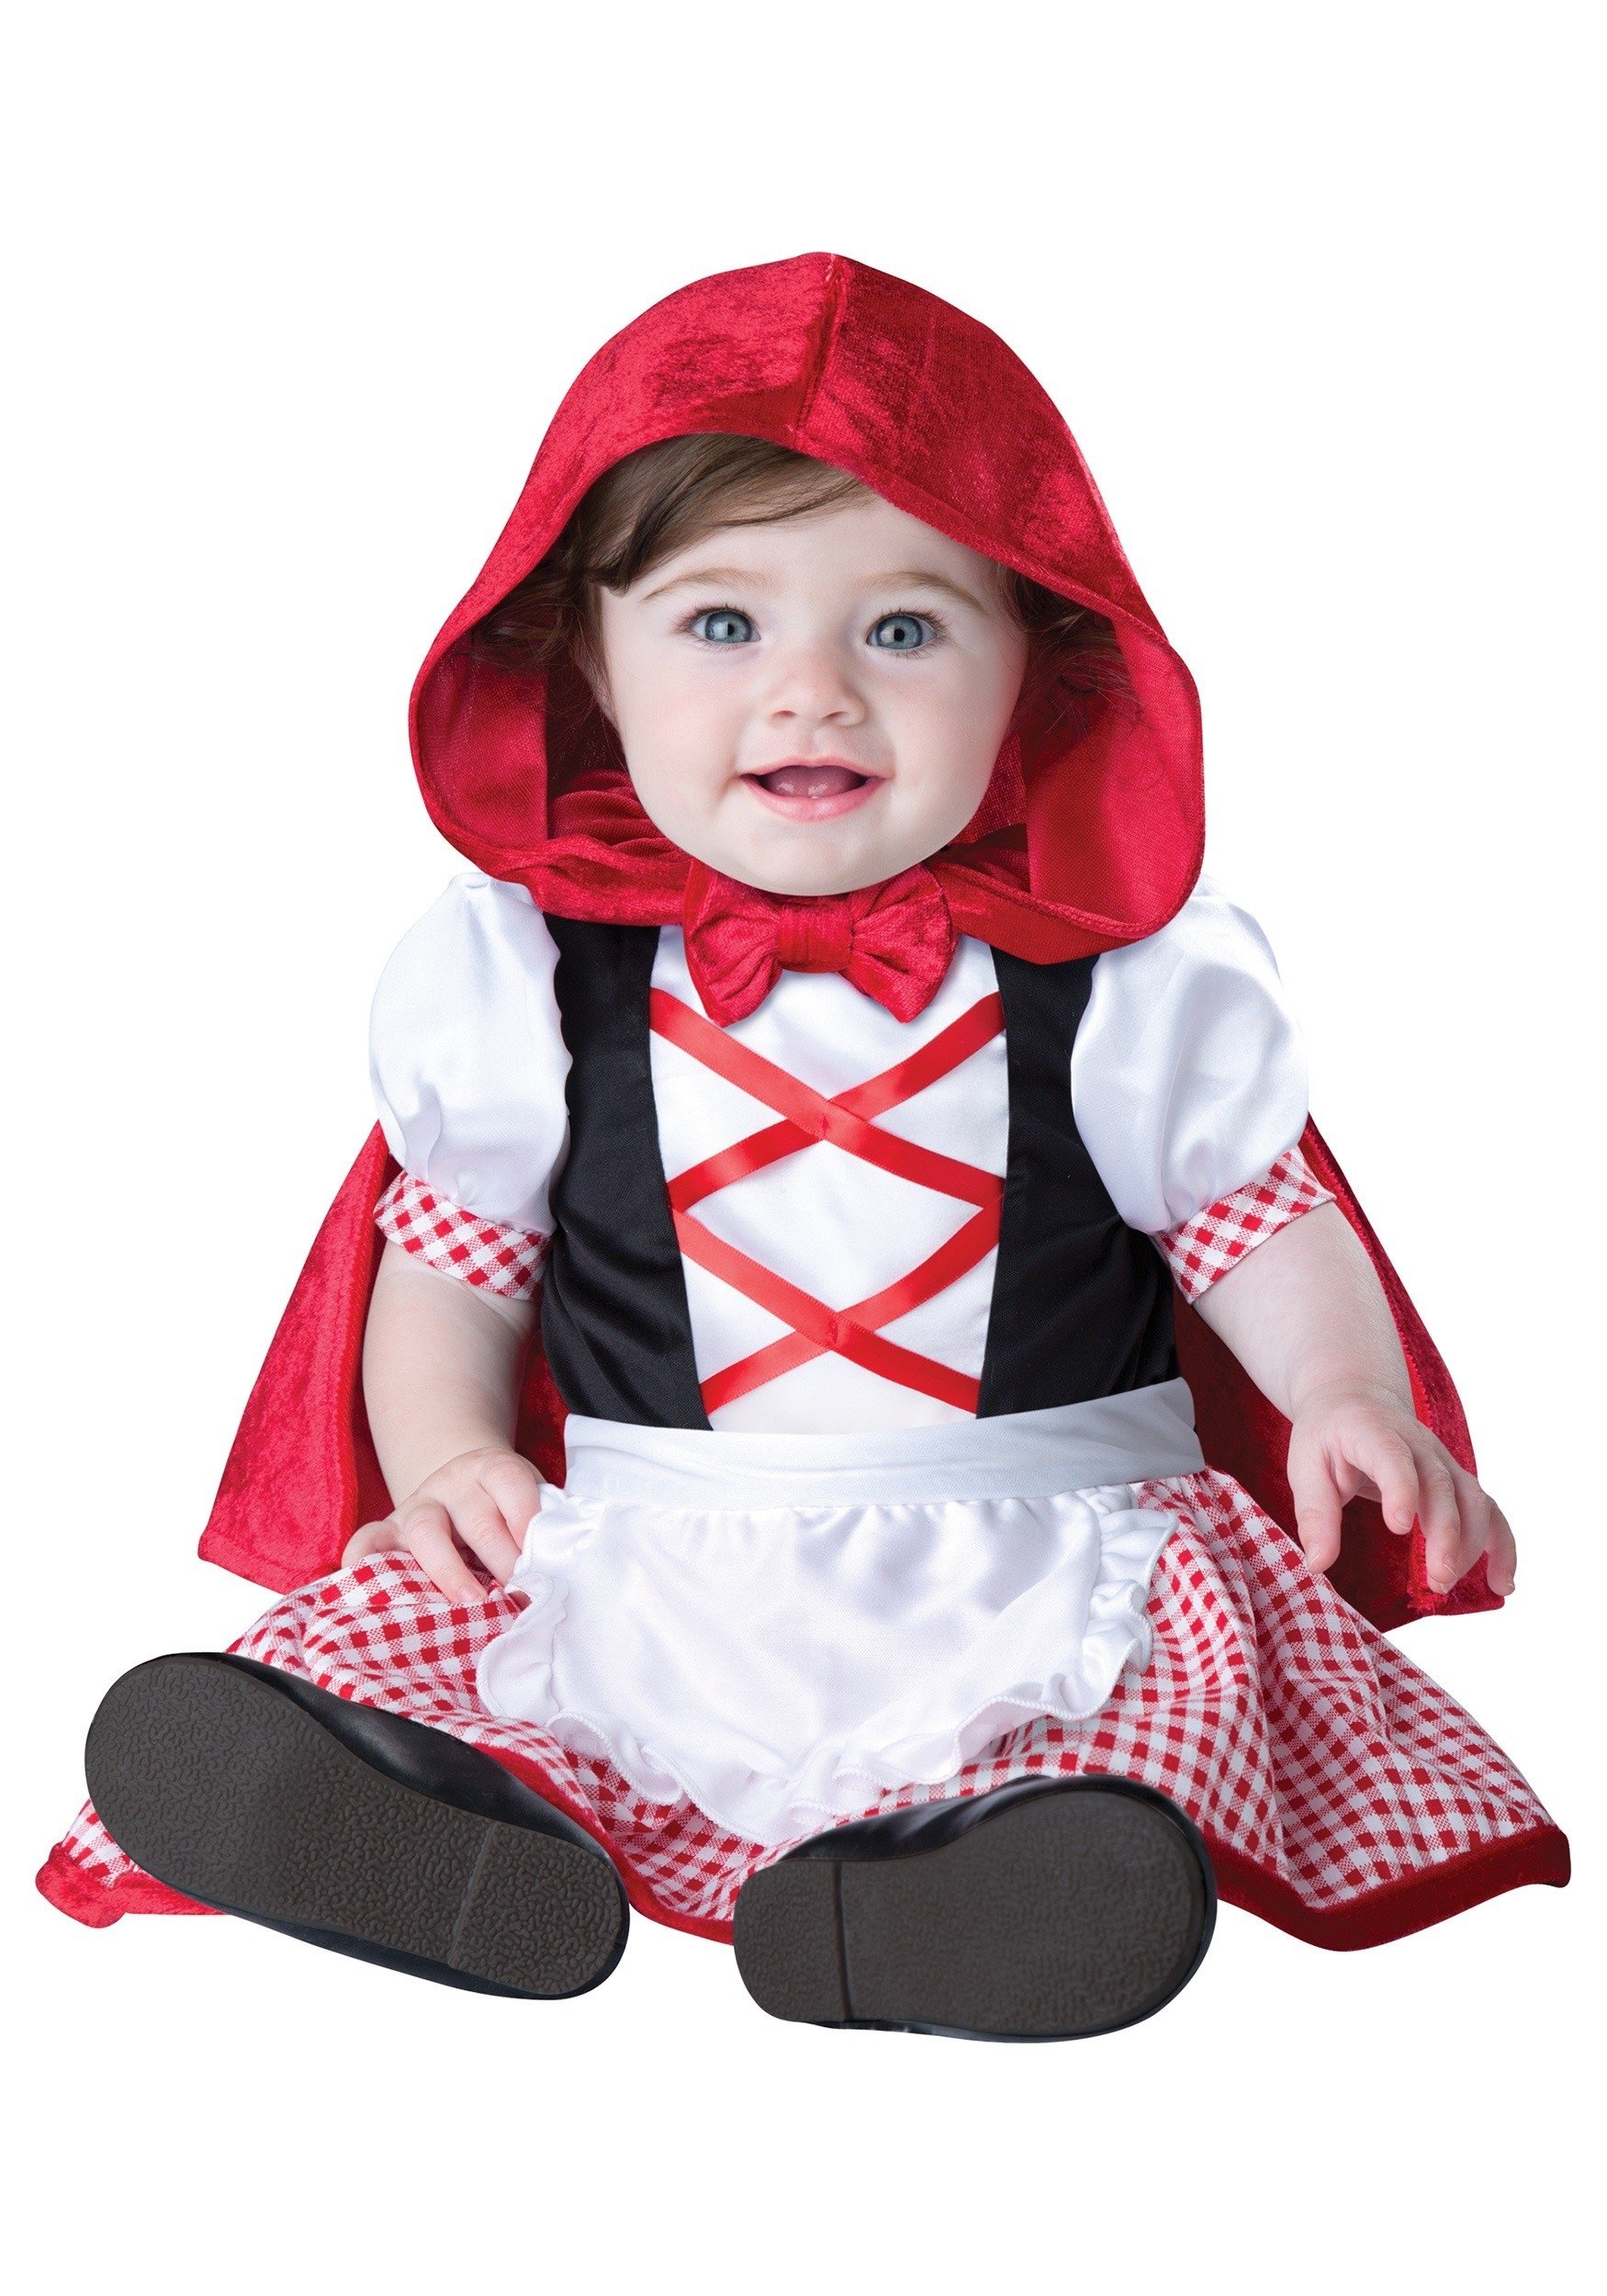 10 Awesome Baby Boy Halloween Costume Ideas newborn baby halloween costumes halloweencostumes 2023